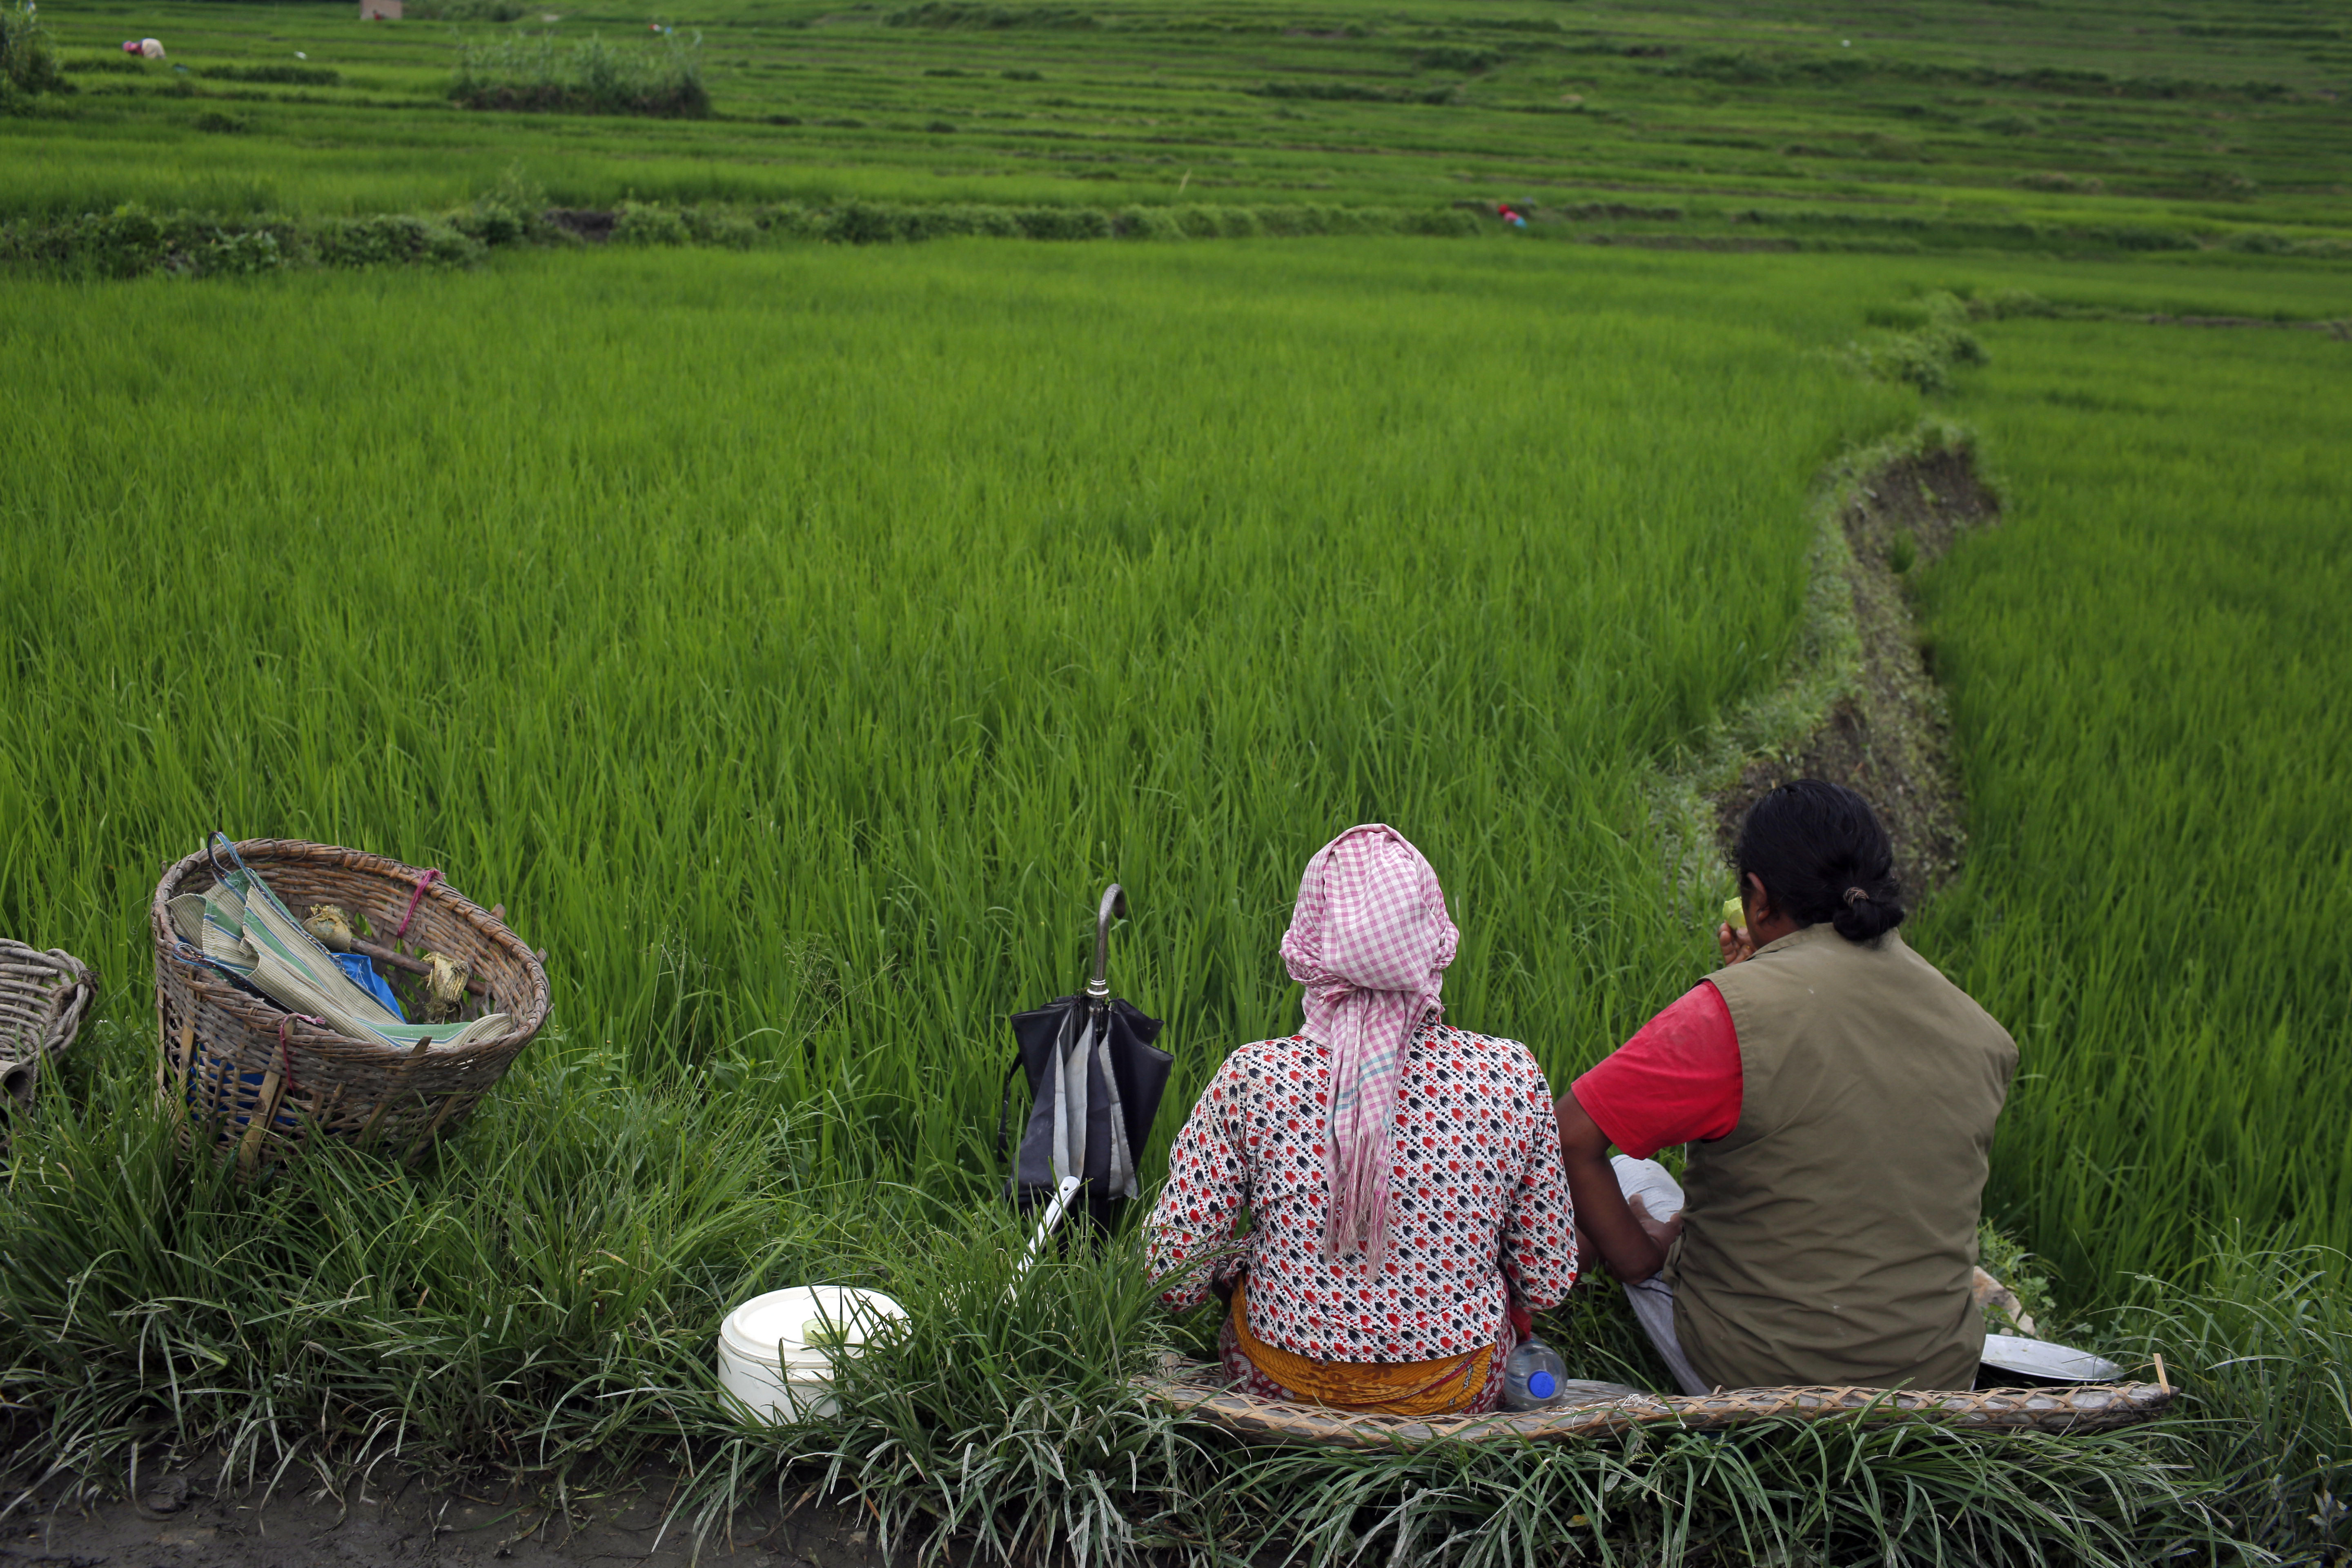 A Nepalese farmer couple eat their lunch while they take a break while working in a paddy field in Khokana, Lalitpur, Nepal, Wednesday, July 26, 2017. Agriculture is the main source of income and employment for most people in Nepal, and rice is one of the main crops. (AP Photo/Niranjan Shrestha)